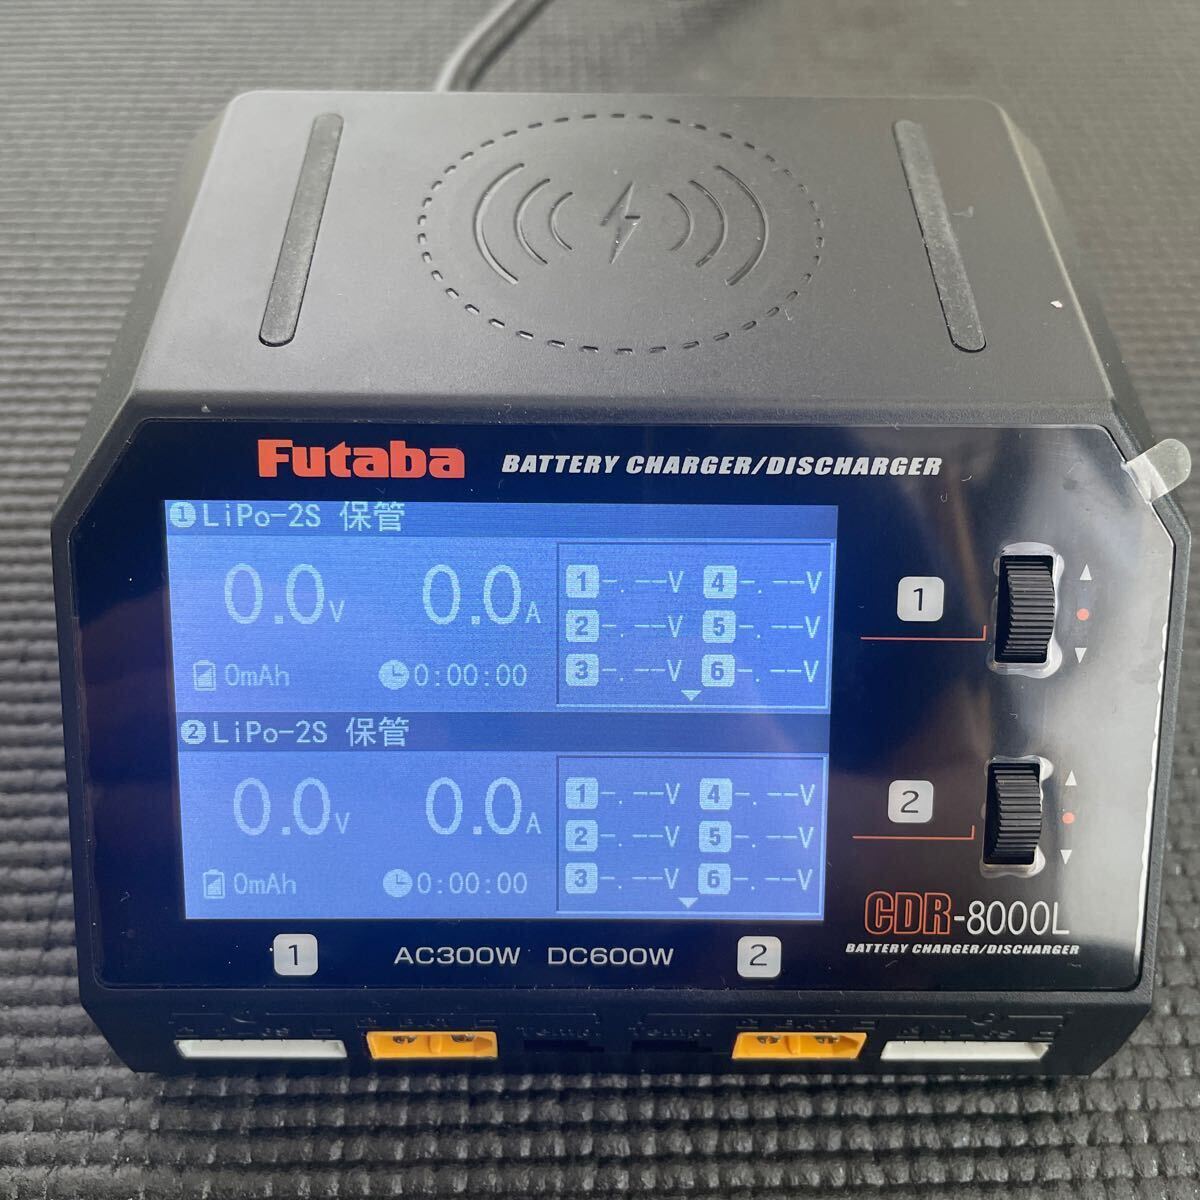 Futaba CDR-8000L BATTERY CHARGER/DISCHAGER フタバ G-Forces の画像1